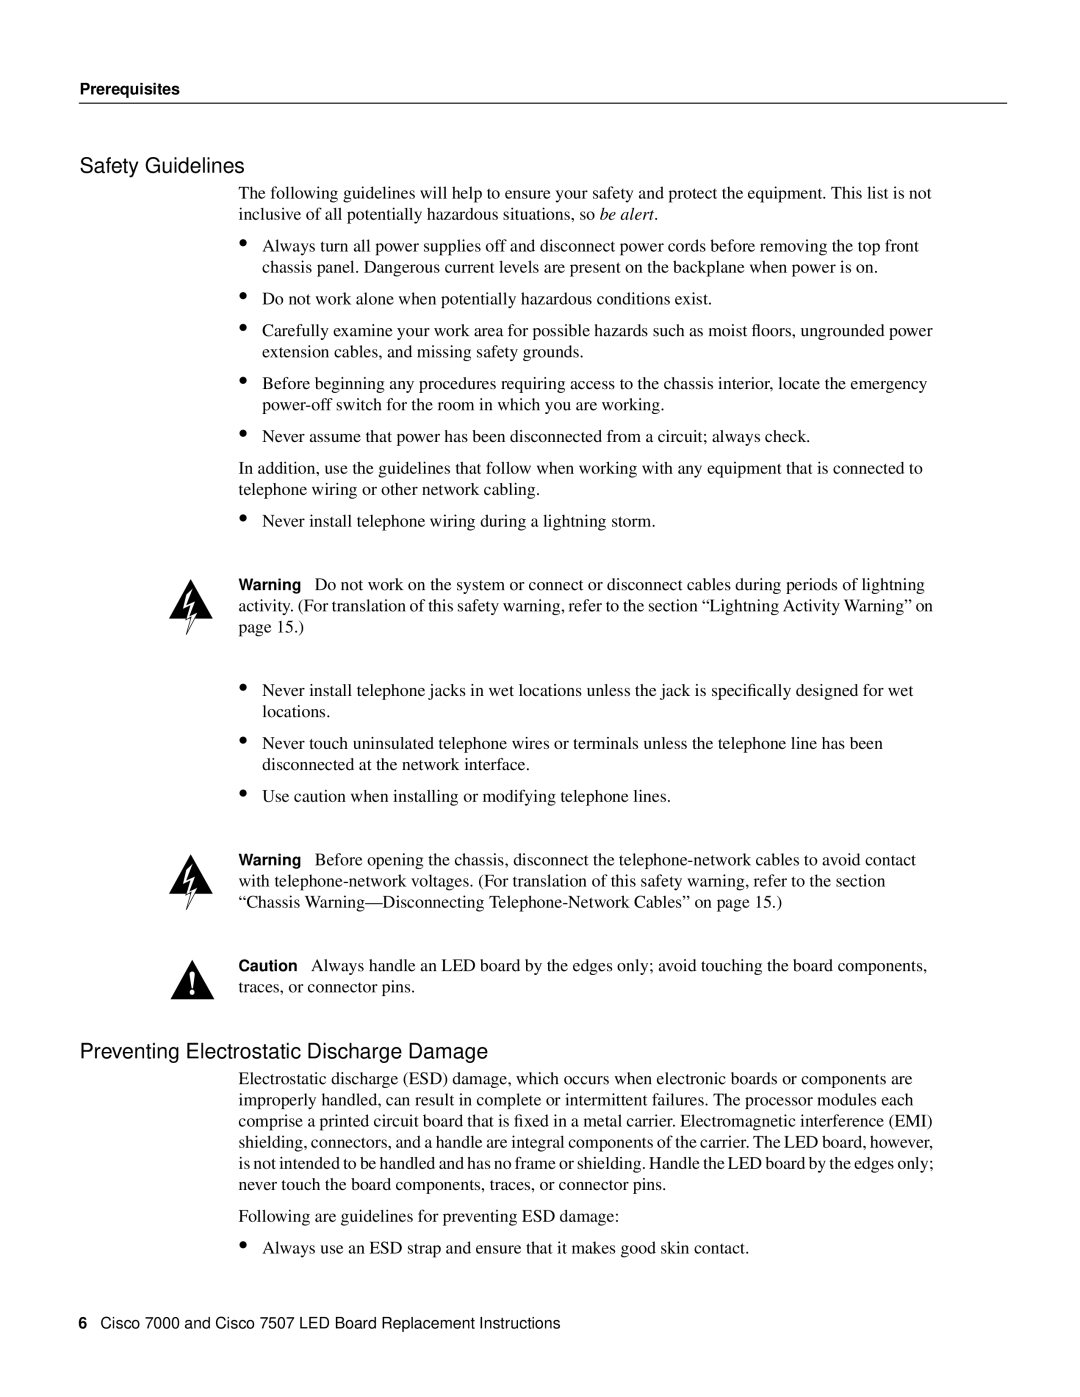 Cisco Systems MAS-7KLED manual Safety Guidelines, Preventing Electrostatic Discharge Damage 